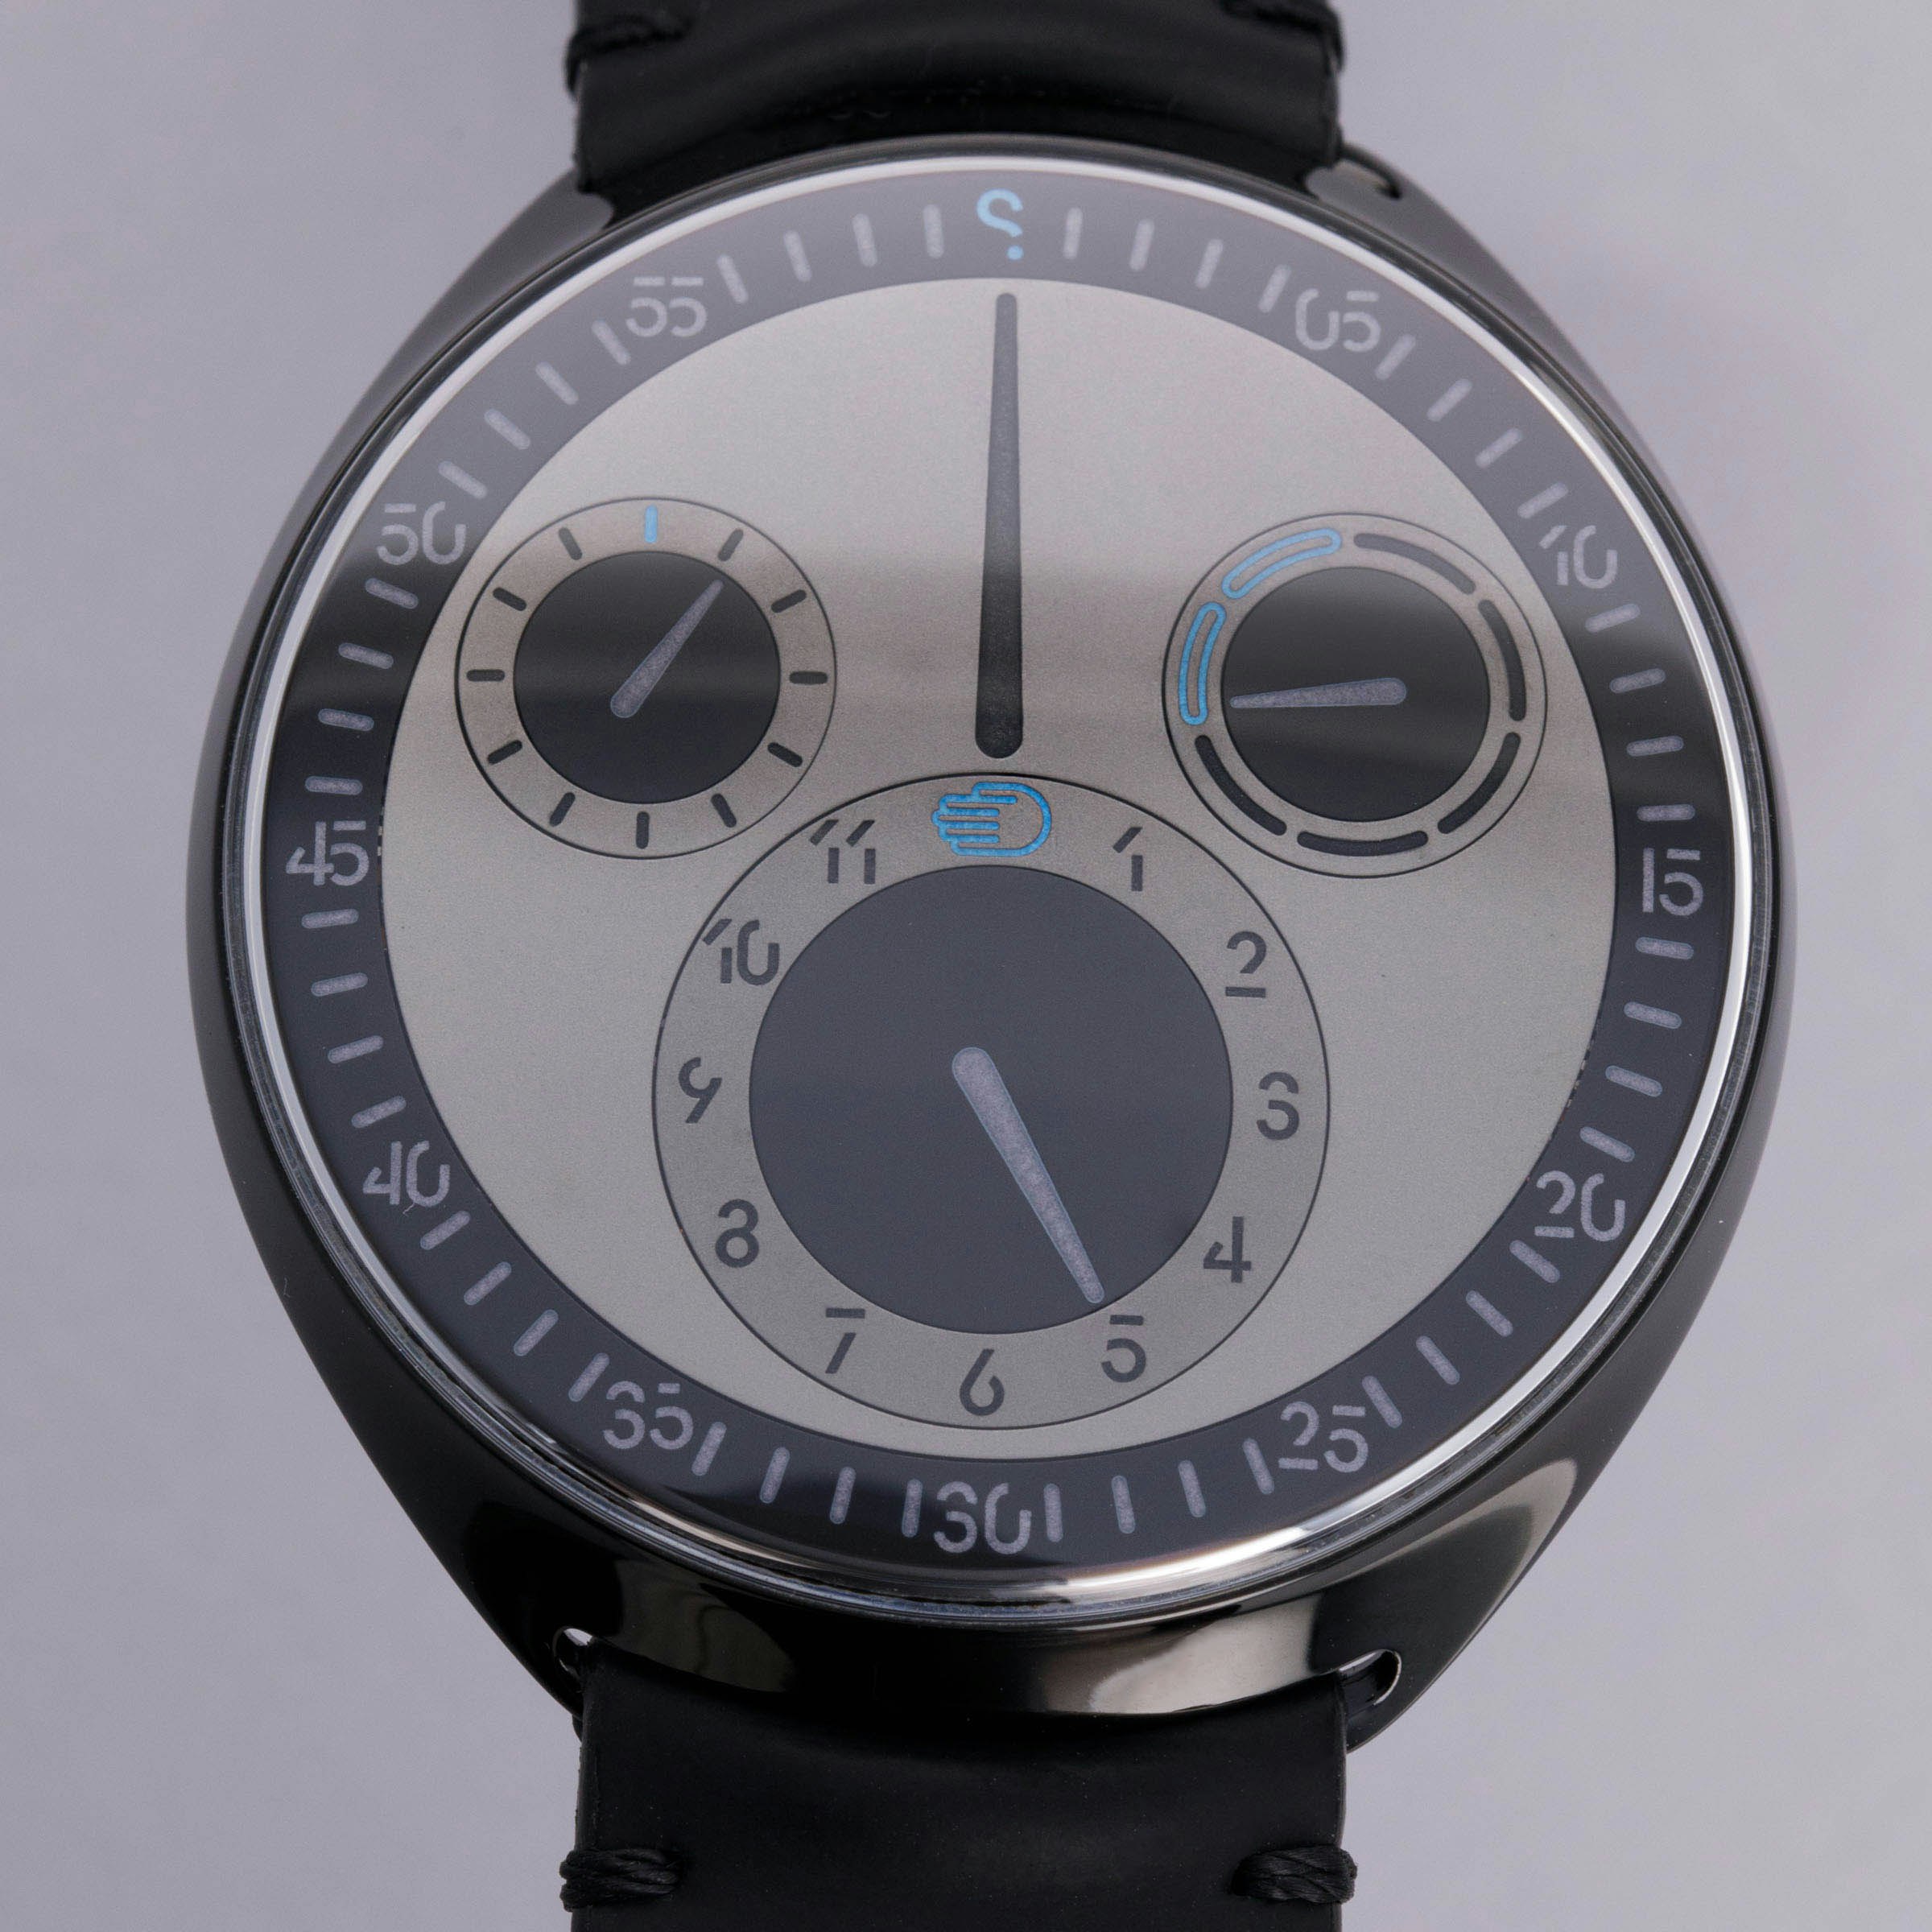 Thumbnail for Ressence Type 1 Spymaster Limited Edition